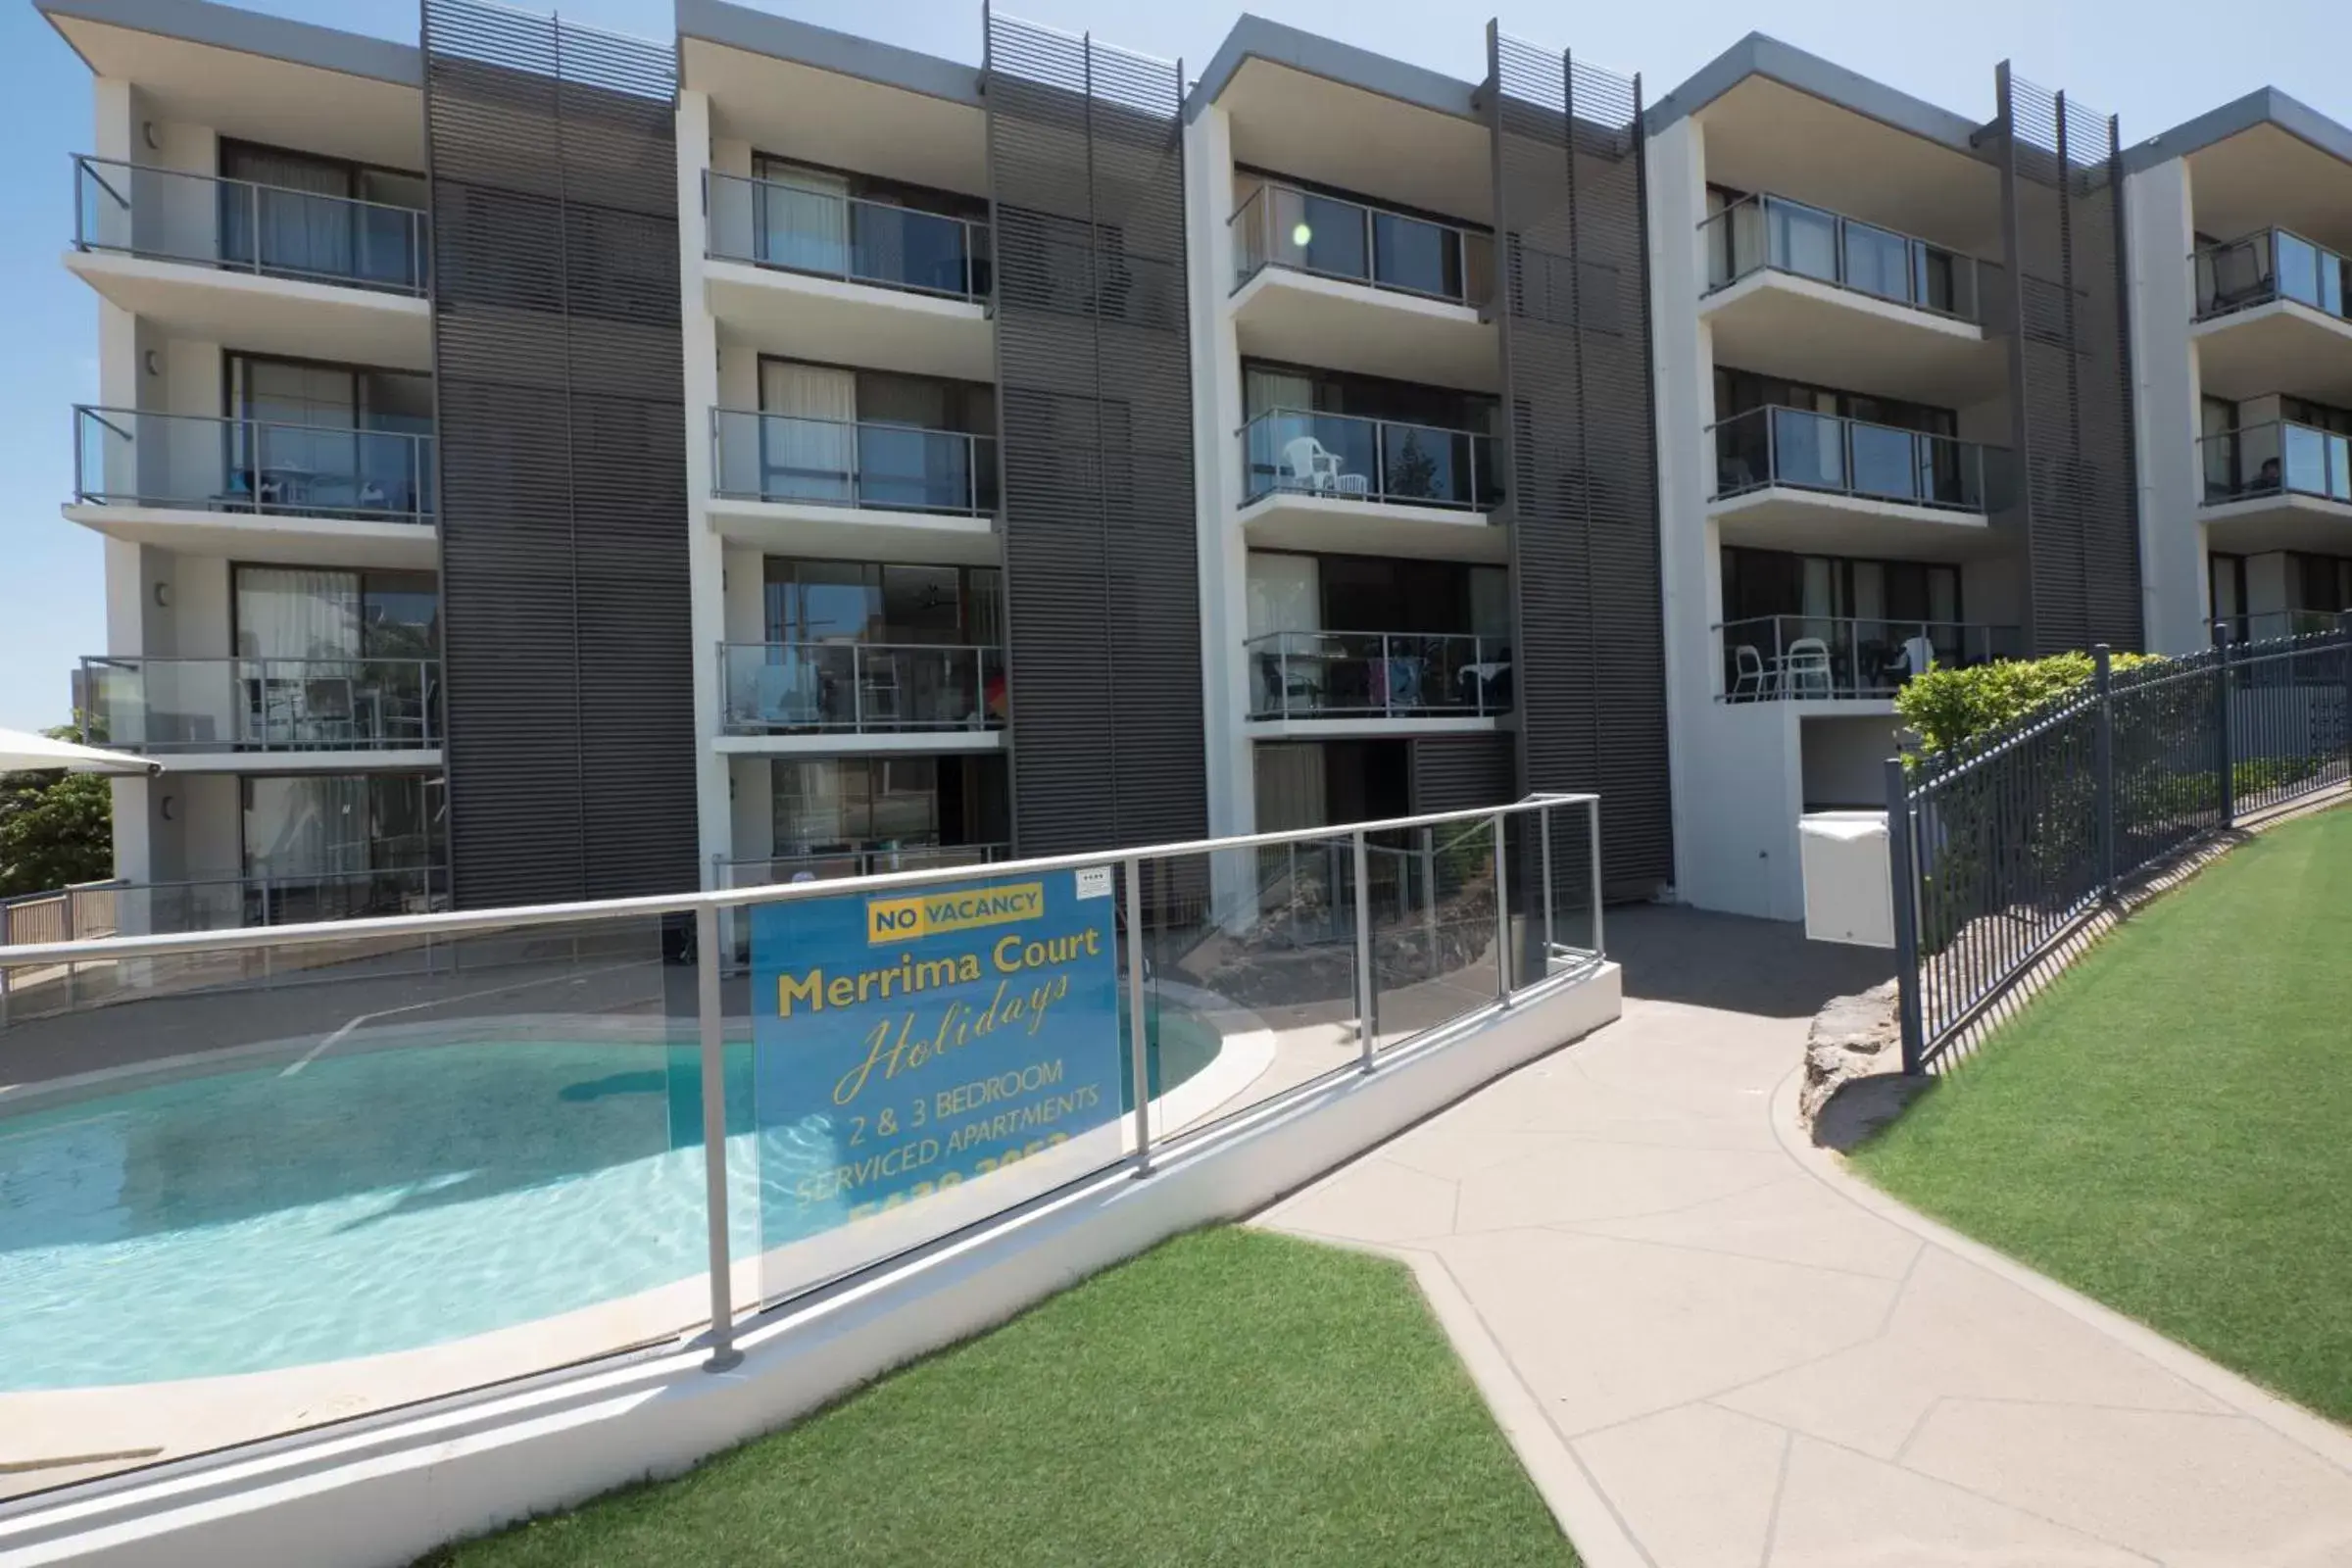 Property Building in Merrima Court Holidays